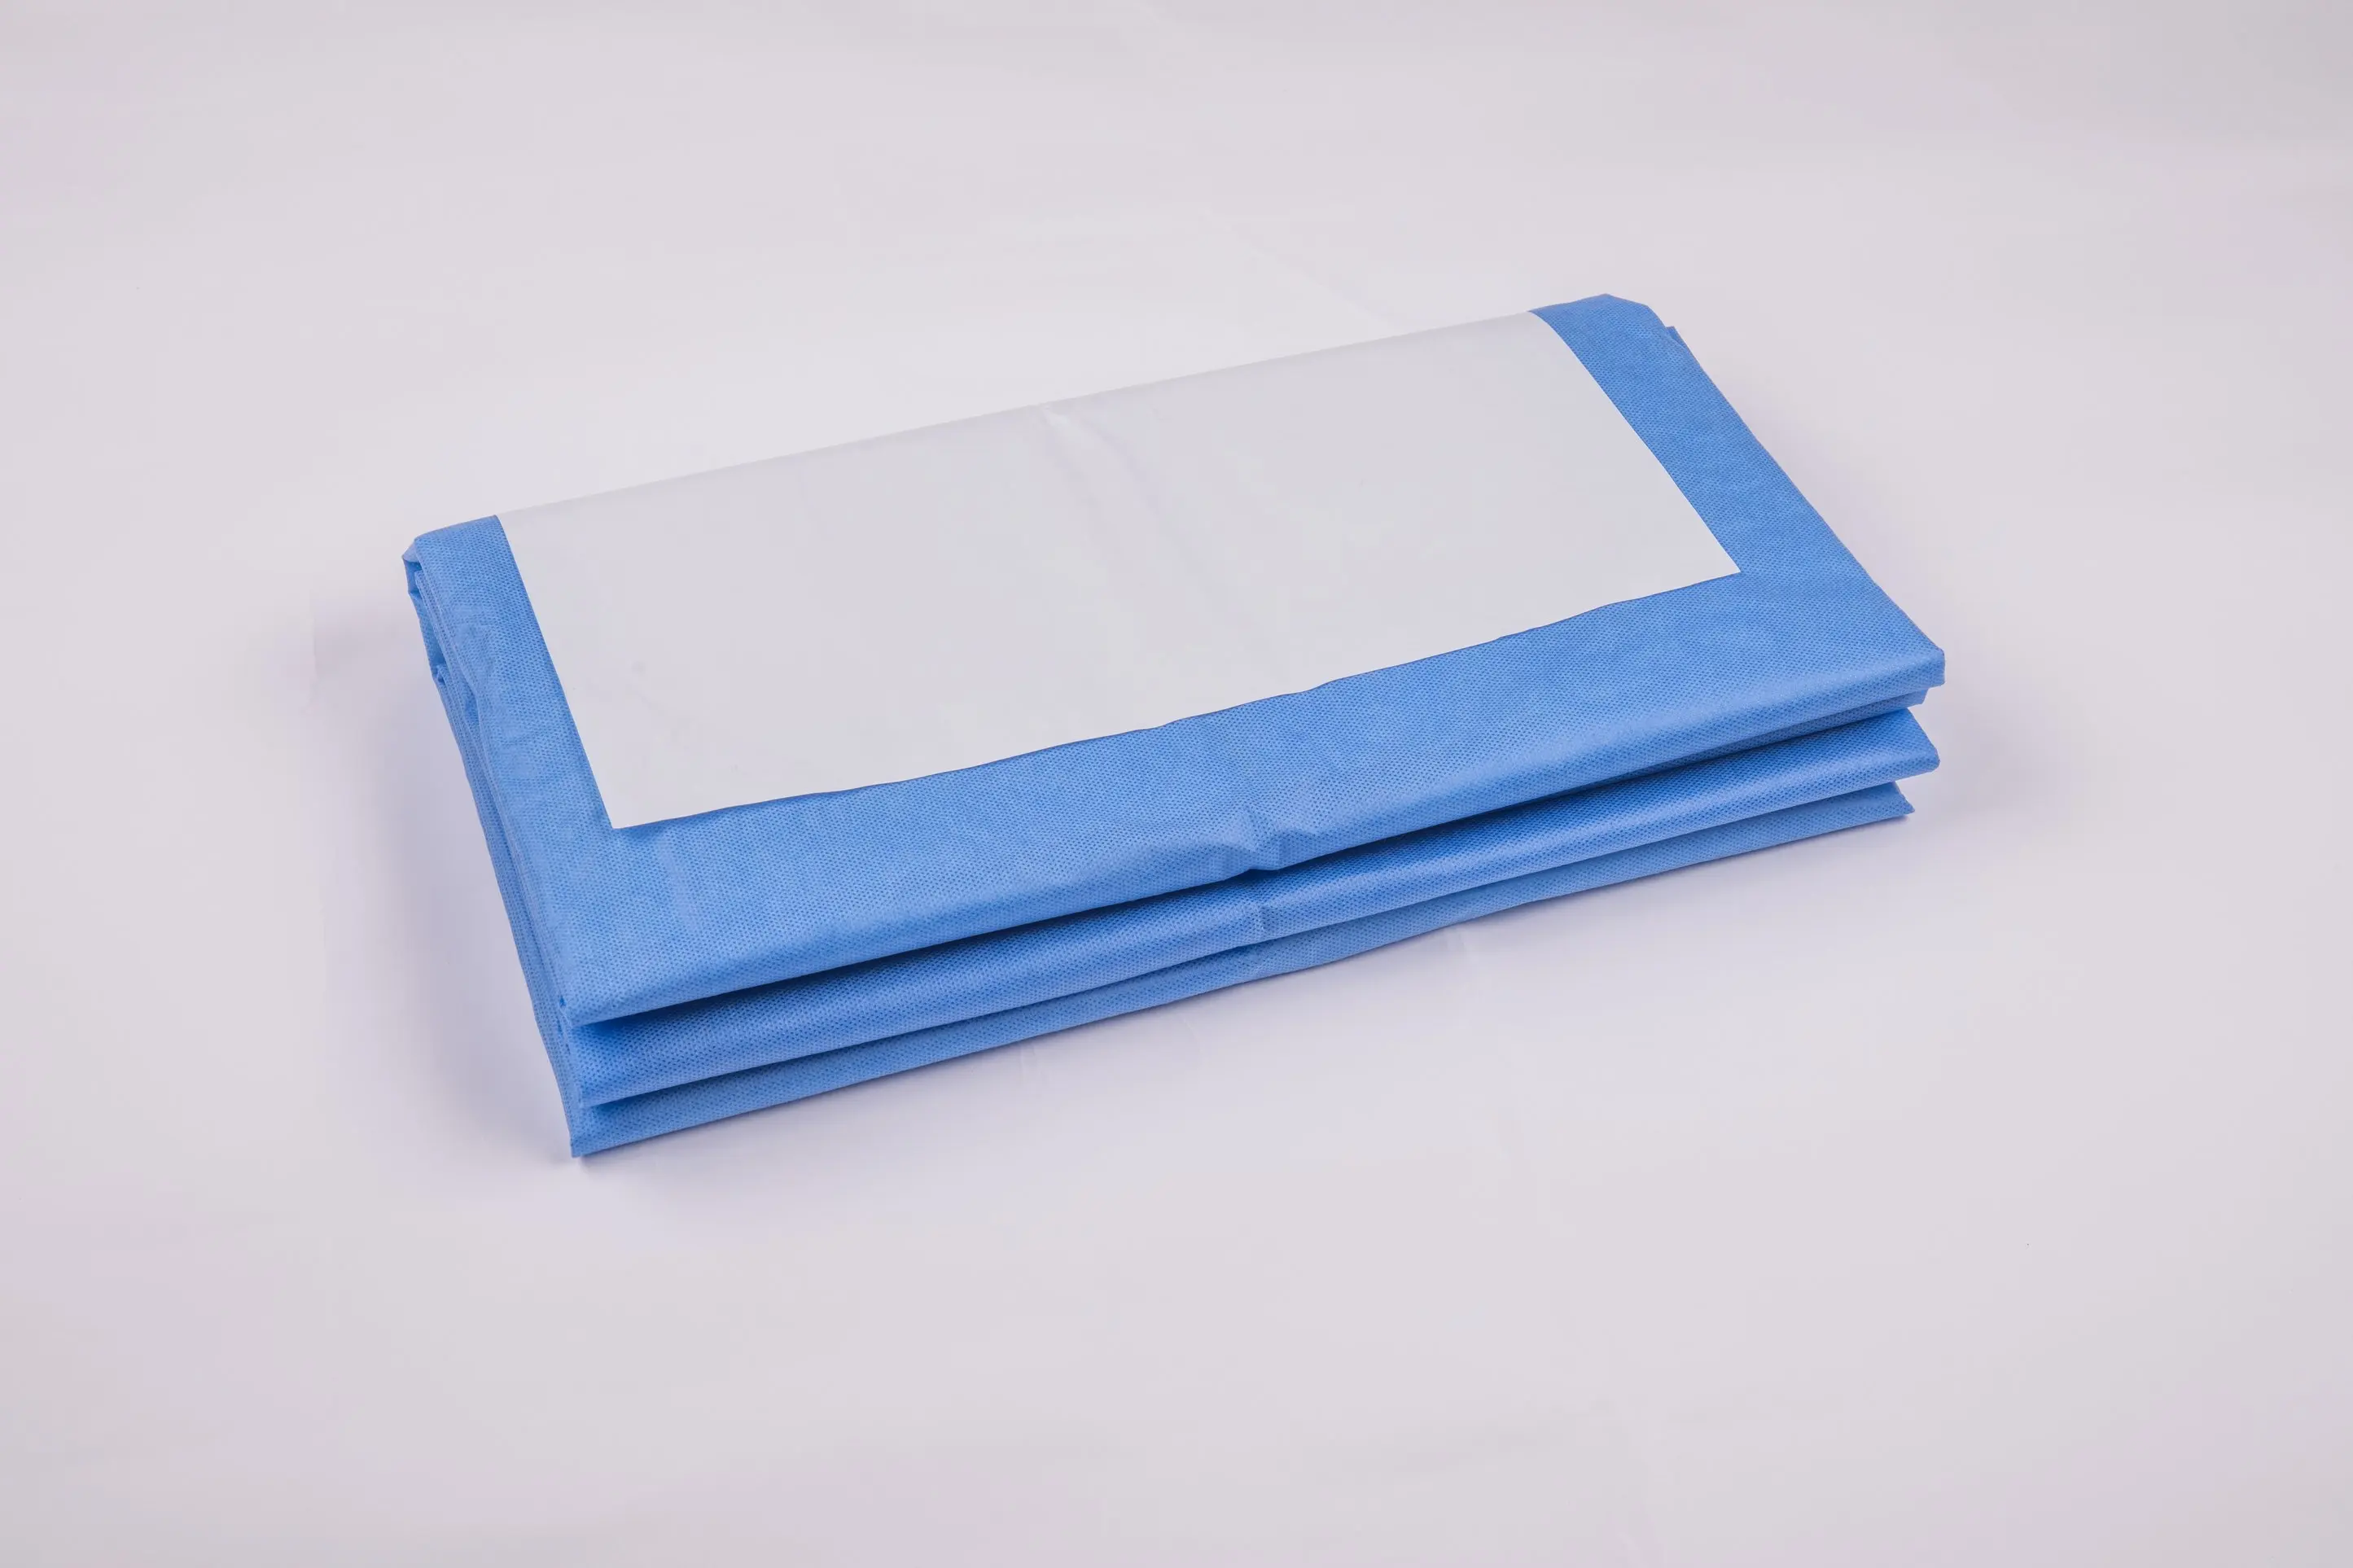 
Disposable Sterile Surgical C-section Pack/Cesarean Section Kit 